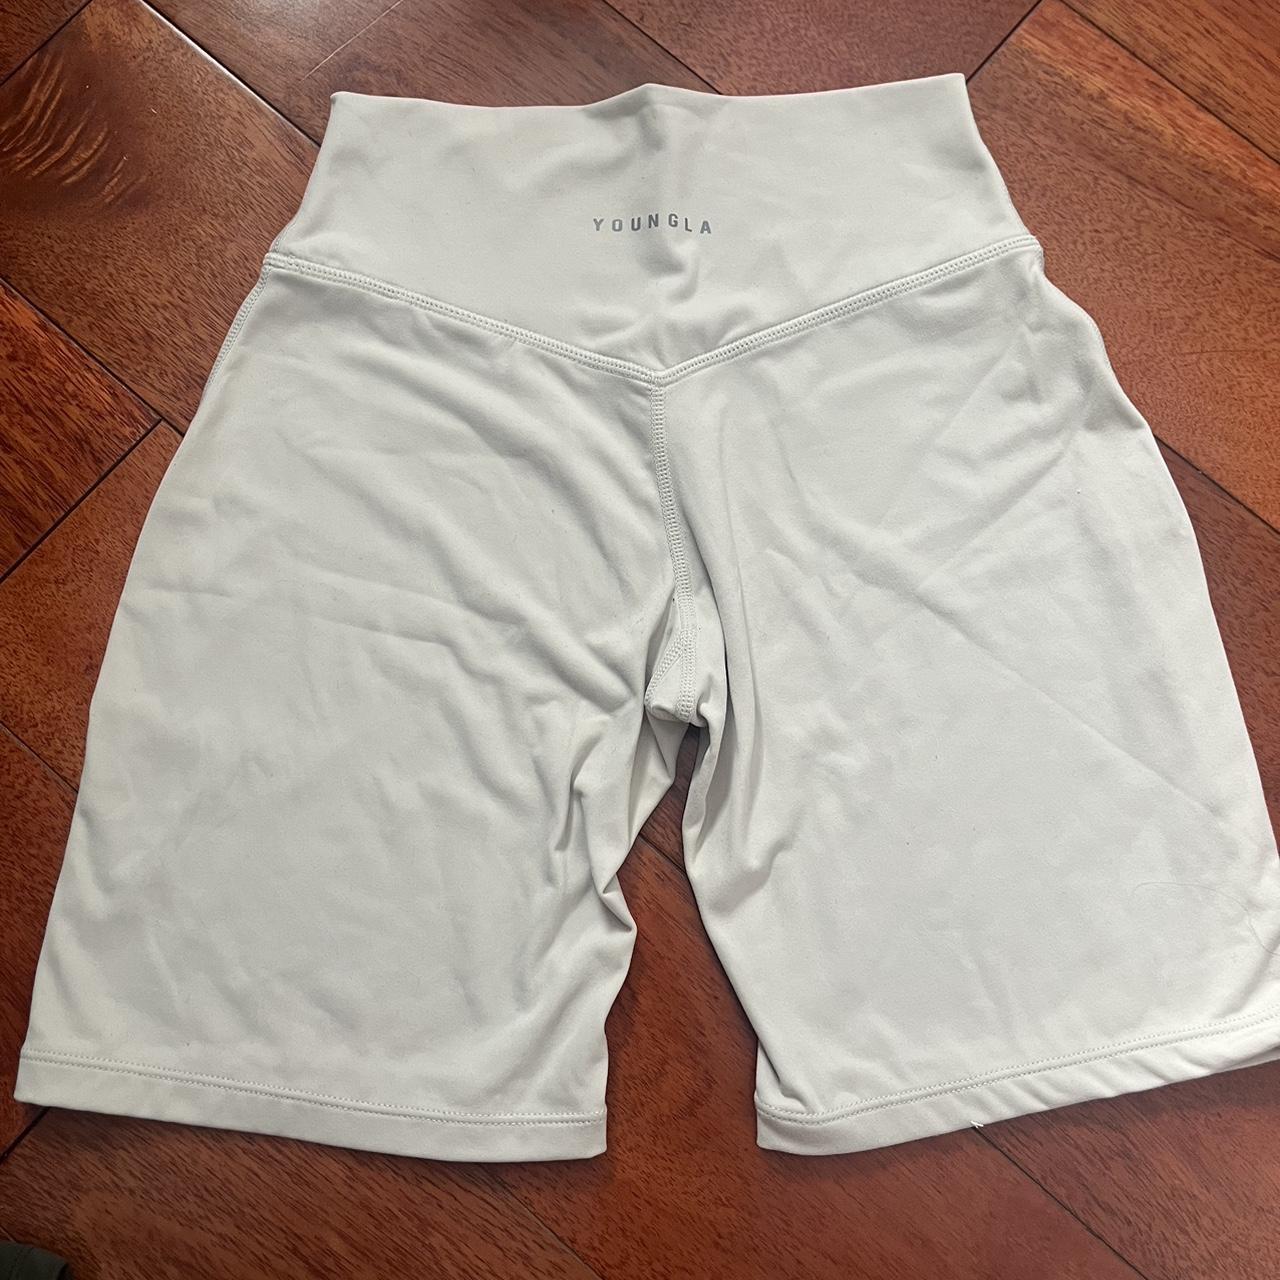 YoungLA Young LA 2in1 Trilogy compression - Depop